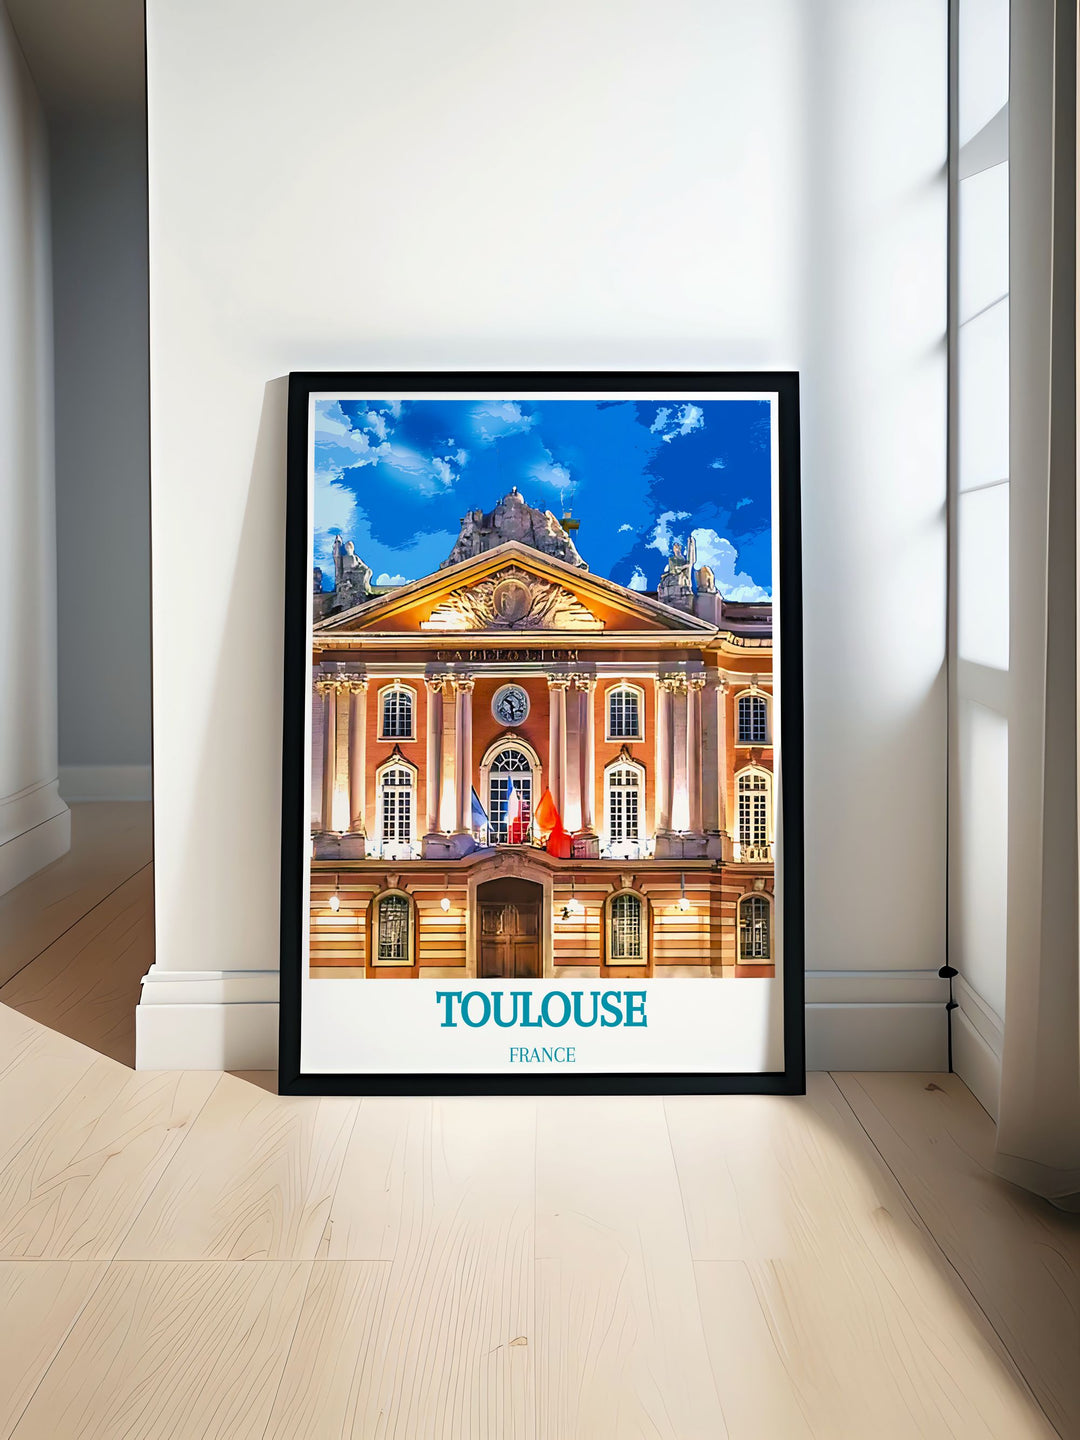 Capture the majestic architecture of Capitole de Toulouse with this vibrant travel poster, showcasing its historic grandeur and intricate details.